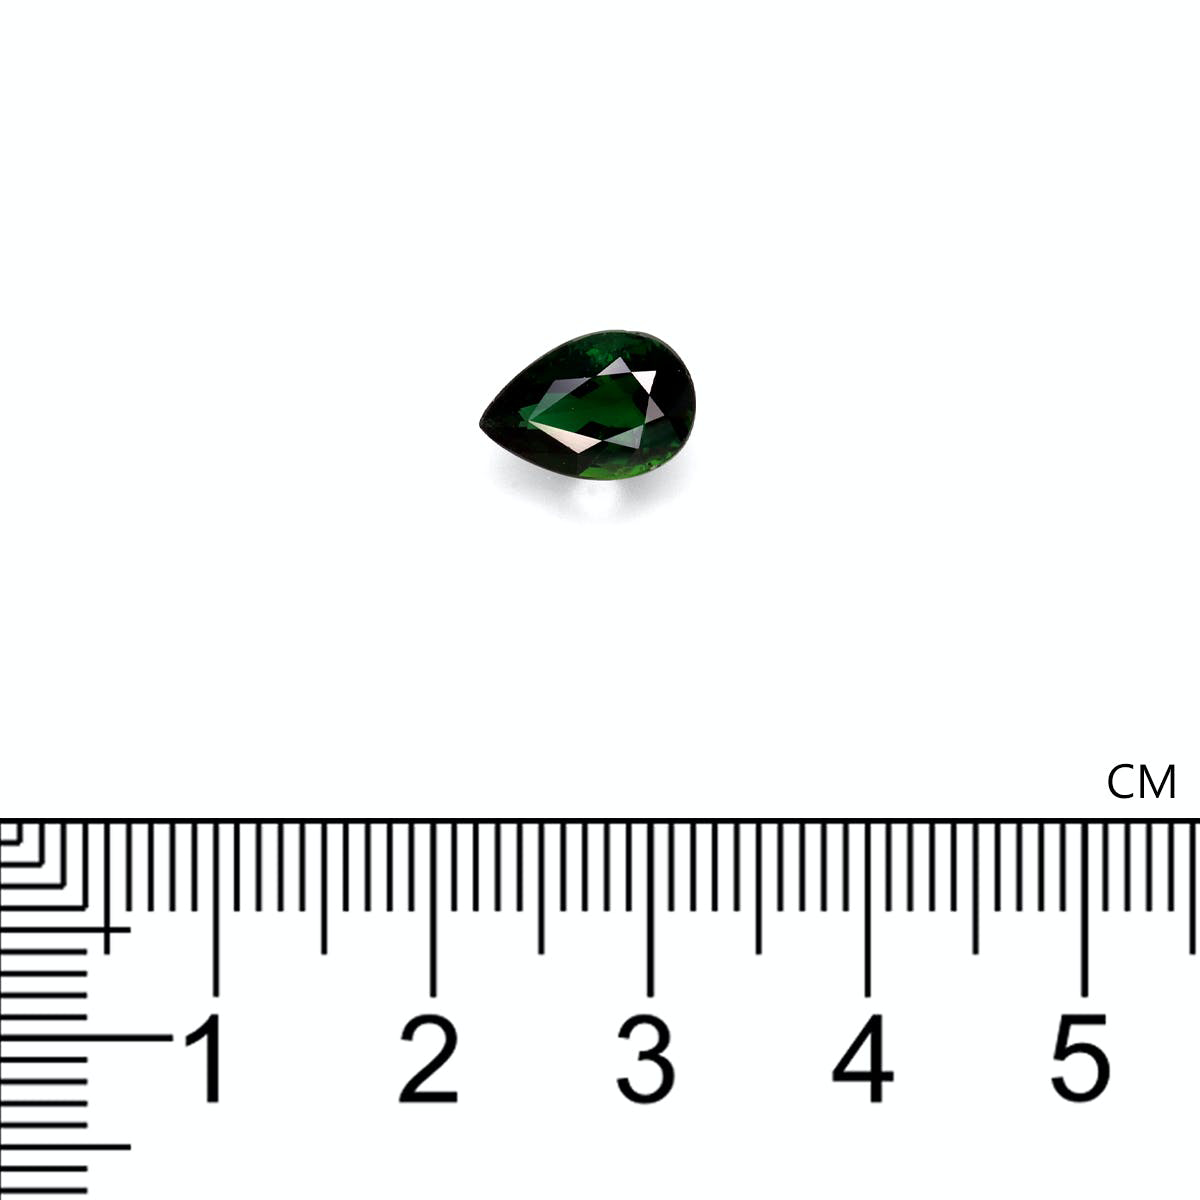 Picture of Basil Green Chrome Tourmaline 2.04ct (CT0282)